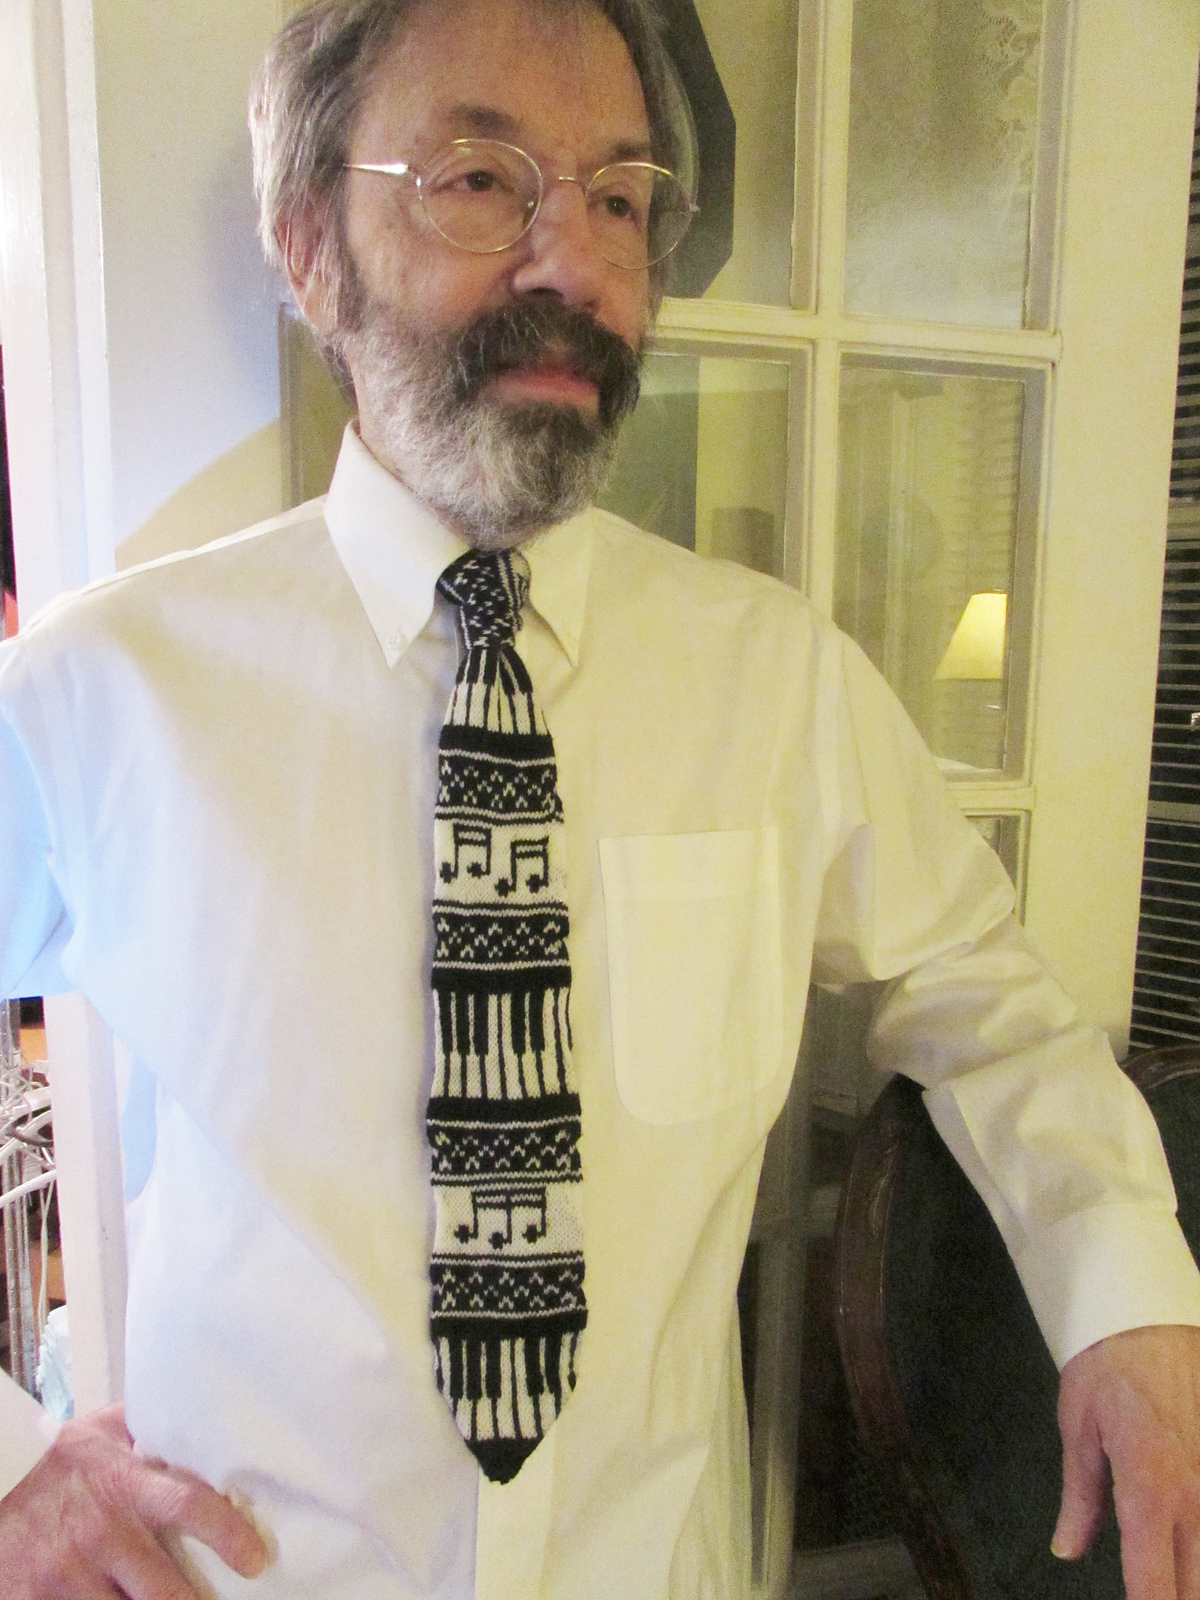 Knit a 'Musica' Neck Tie For Your Fave Music Lover - Pattern Designed By Deborah Tomasello